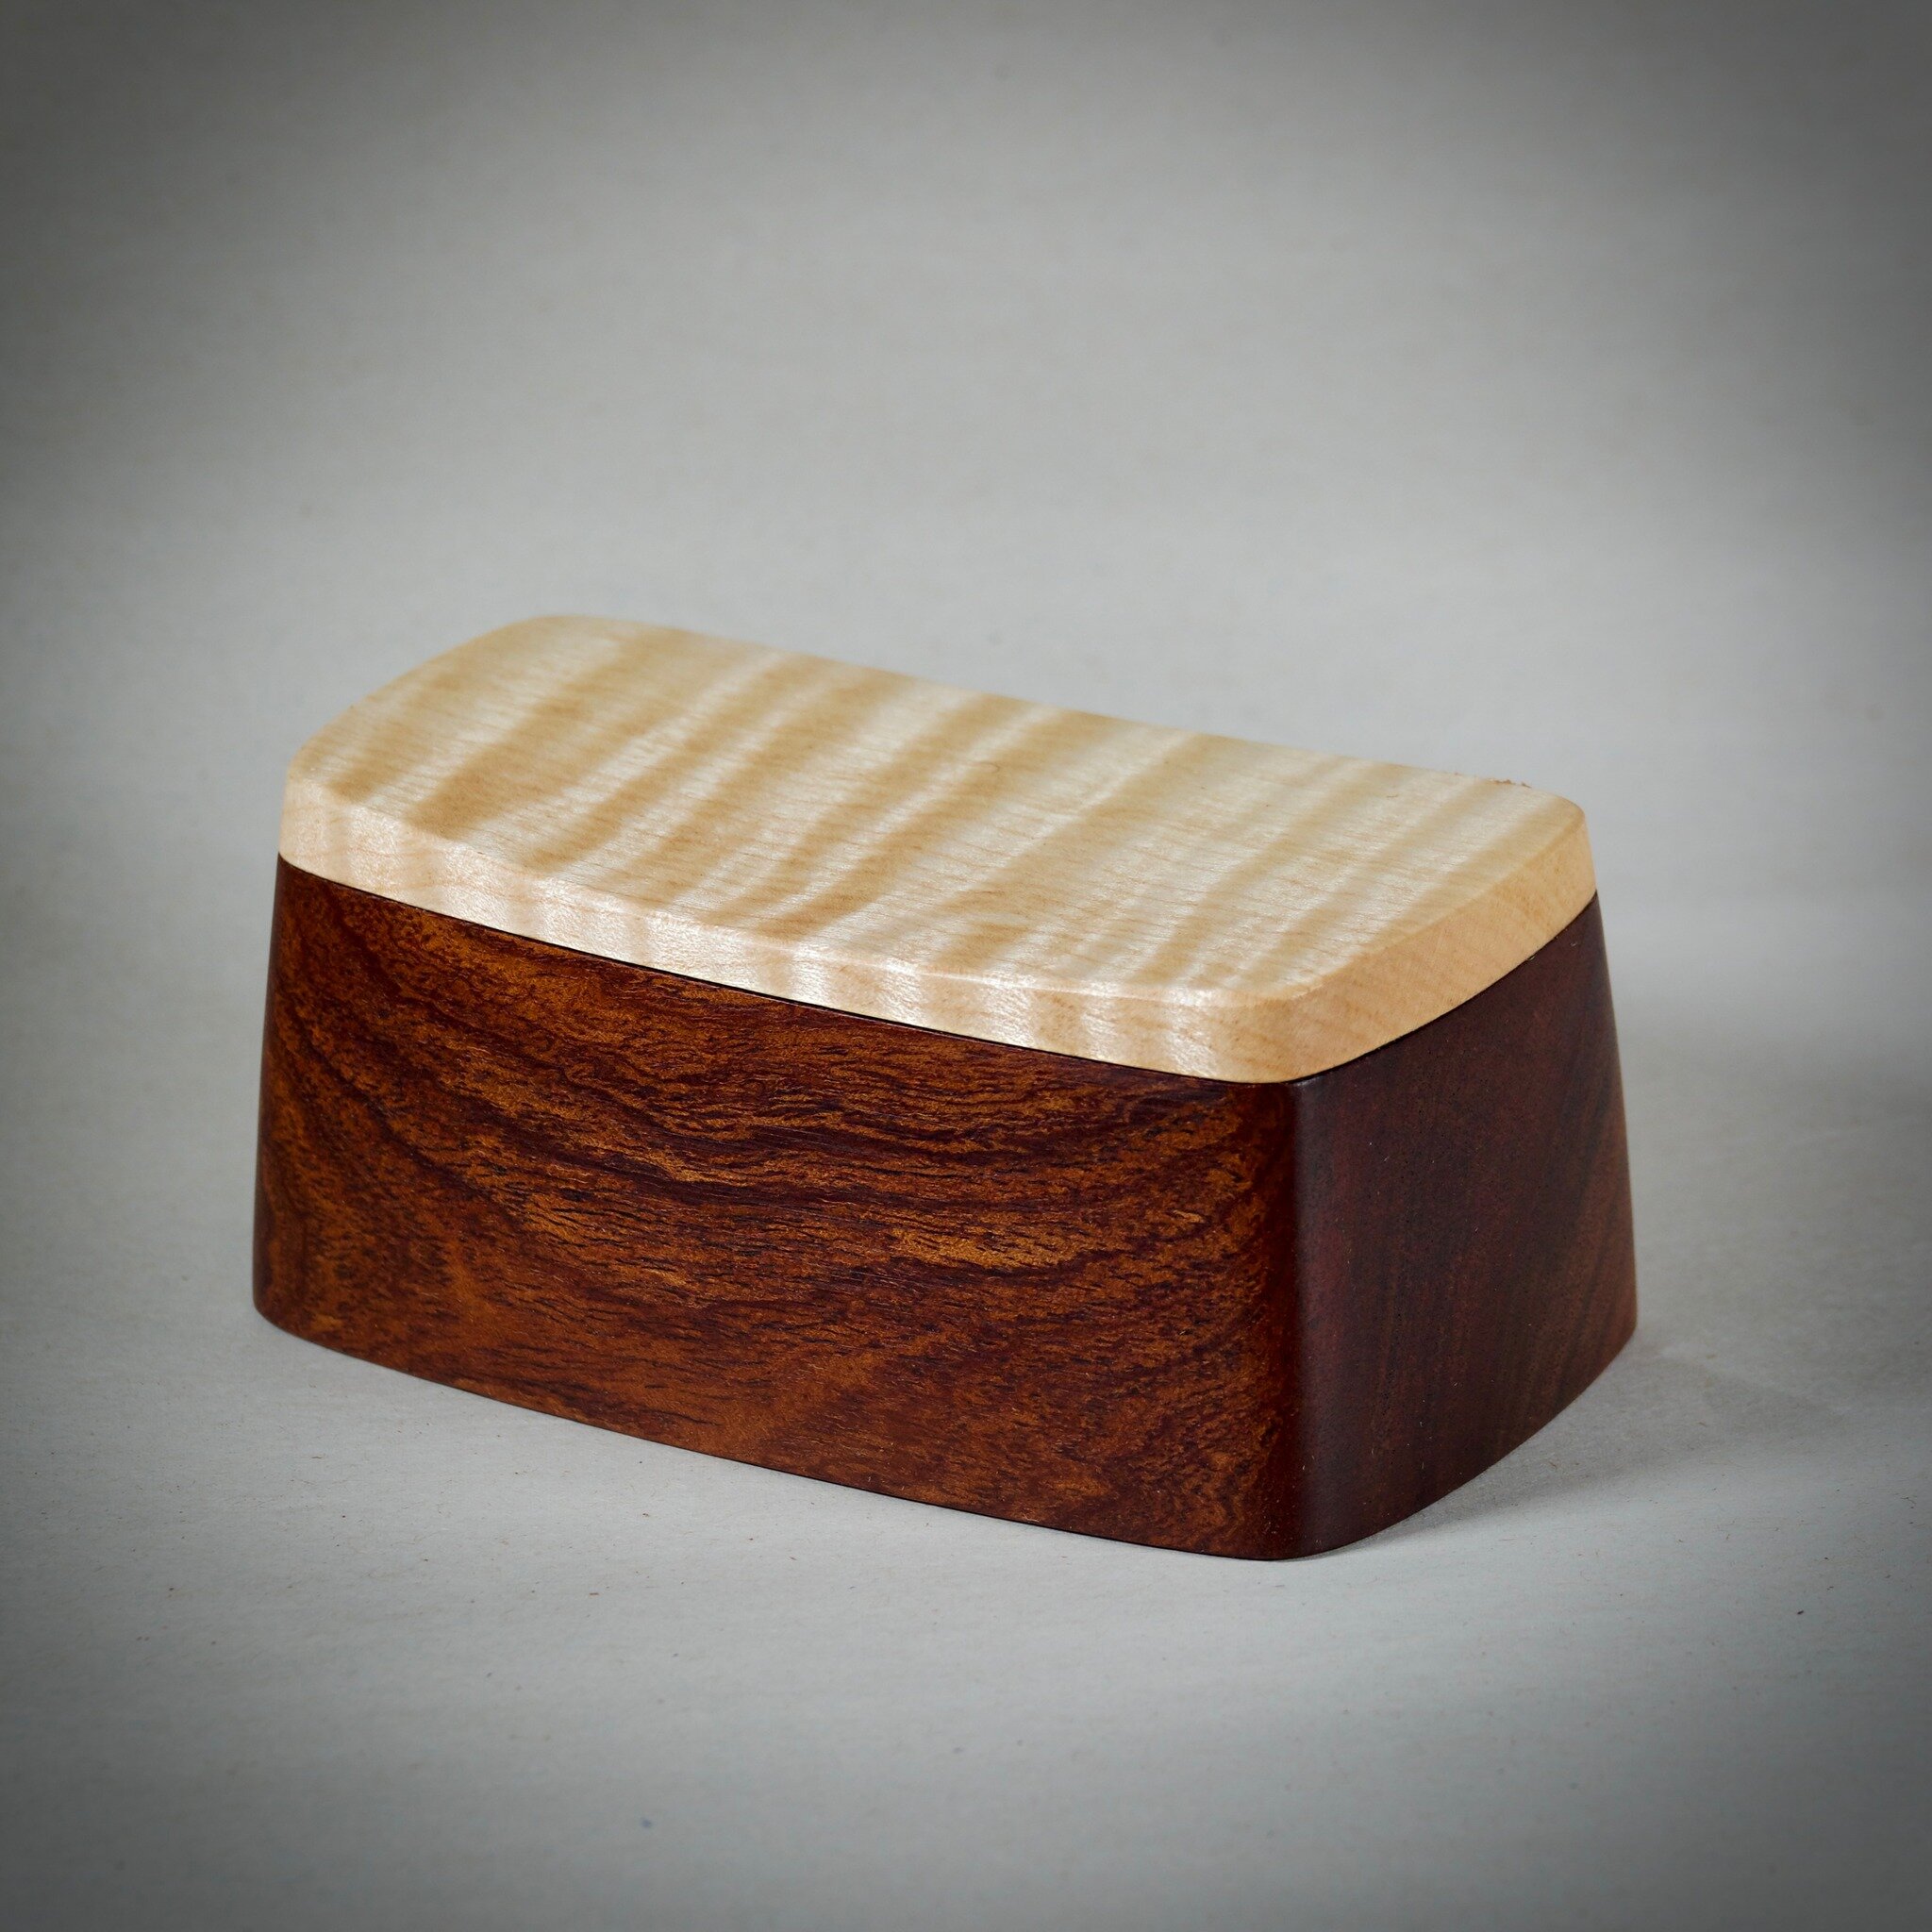 Rescued from the woodstove! These little boxes are made from local figured broadleaf maple and not so local Tasmanian Blackwood. I always struggle to find good use for stunning little offcuts like these. The boxes are only about 5&quot; long. 

It's 